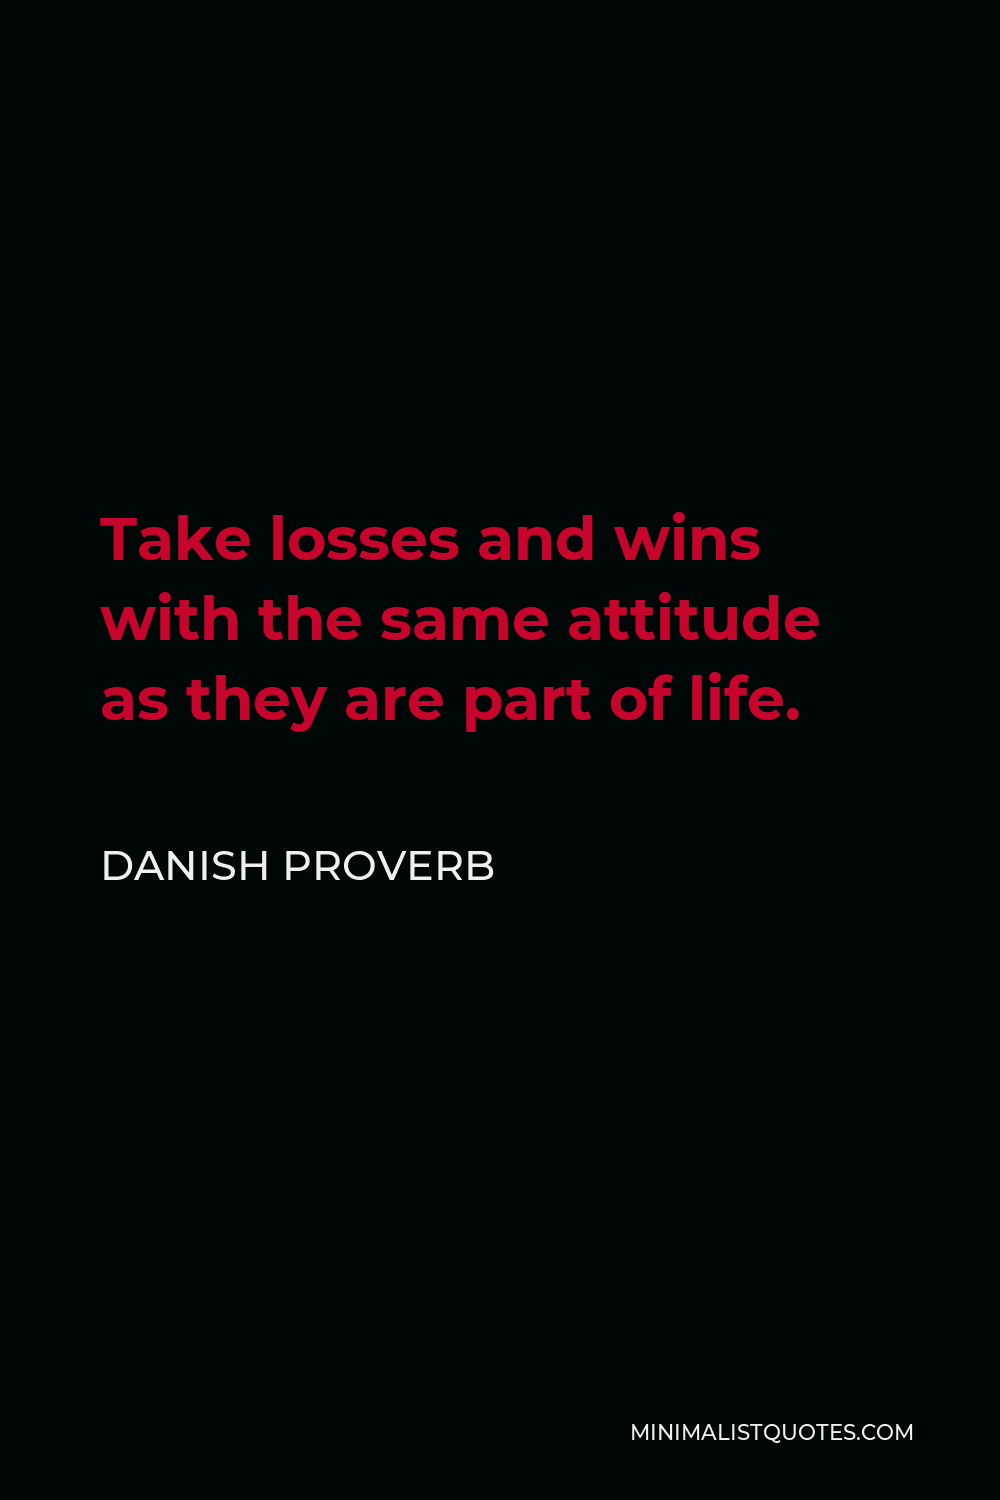 Danish Proverb Quote - Take losses and wins with the same attitude as they are part of life.